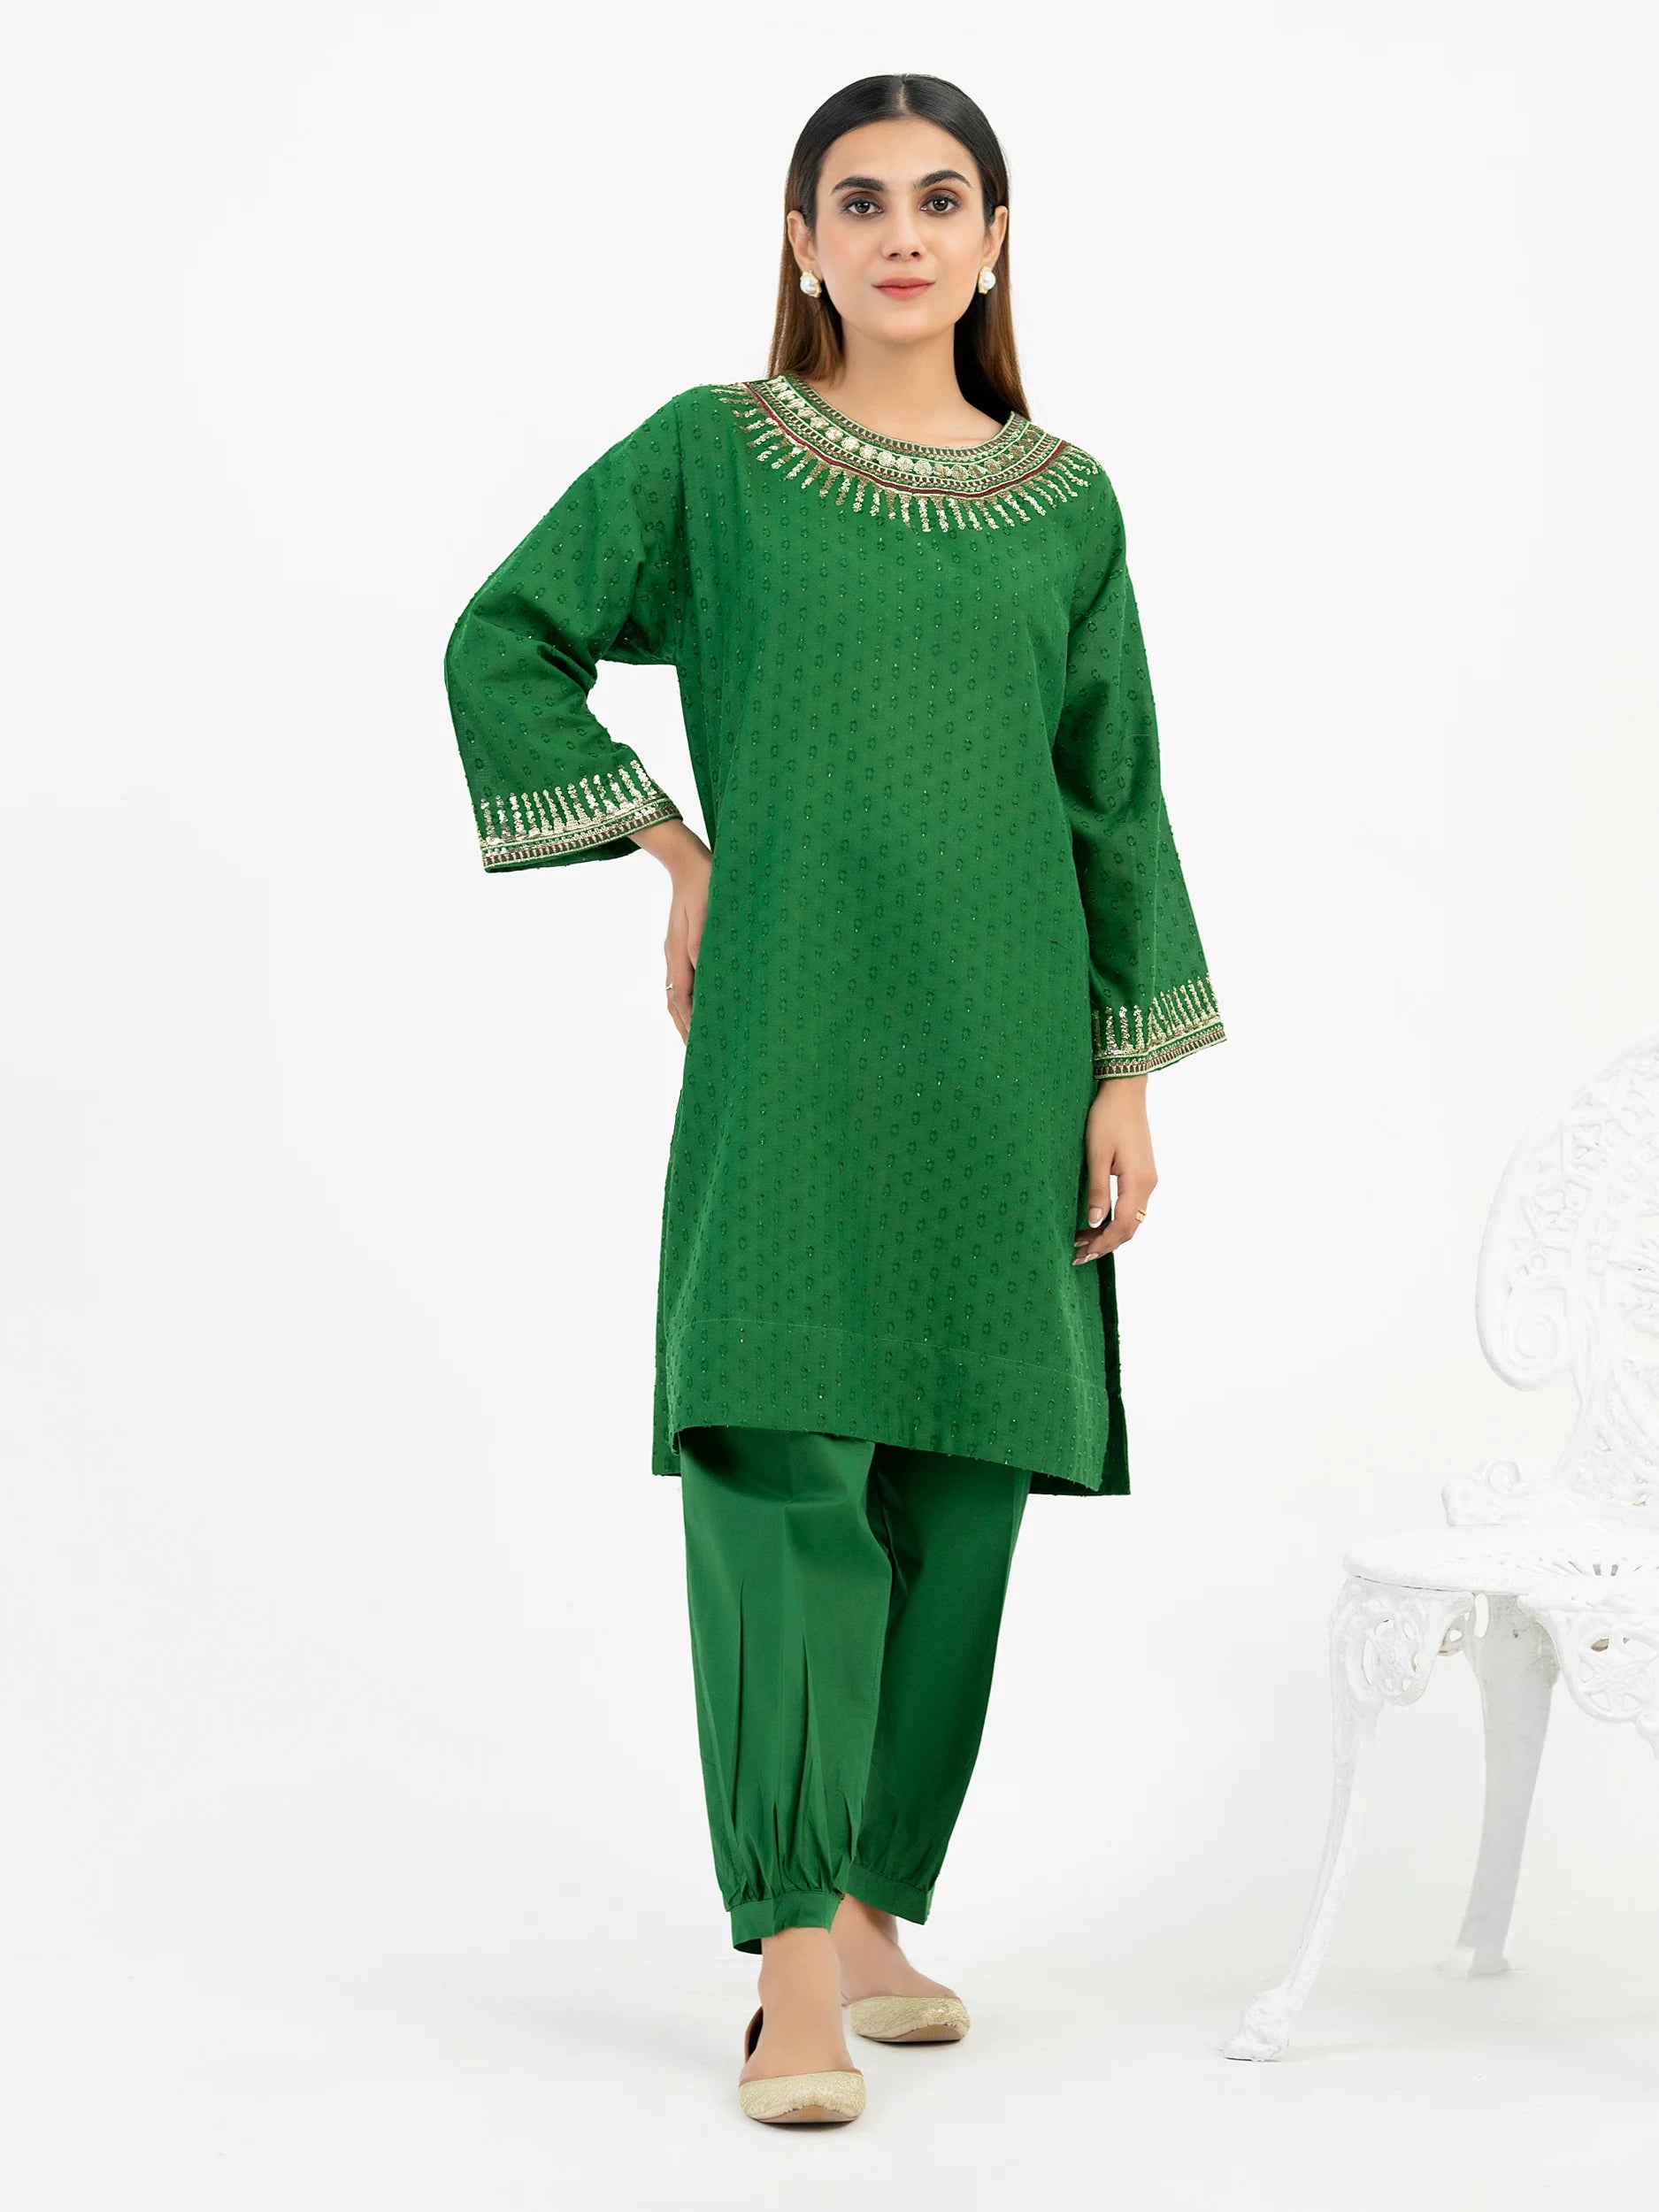 Lime Light Embroidered Jacquard 2 Piece Suit LM-10